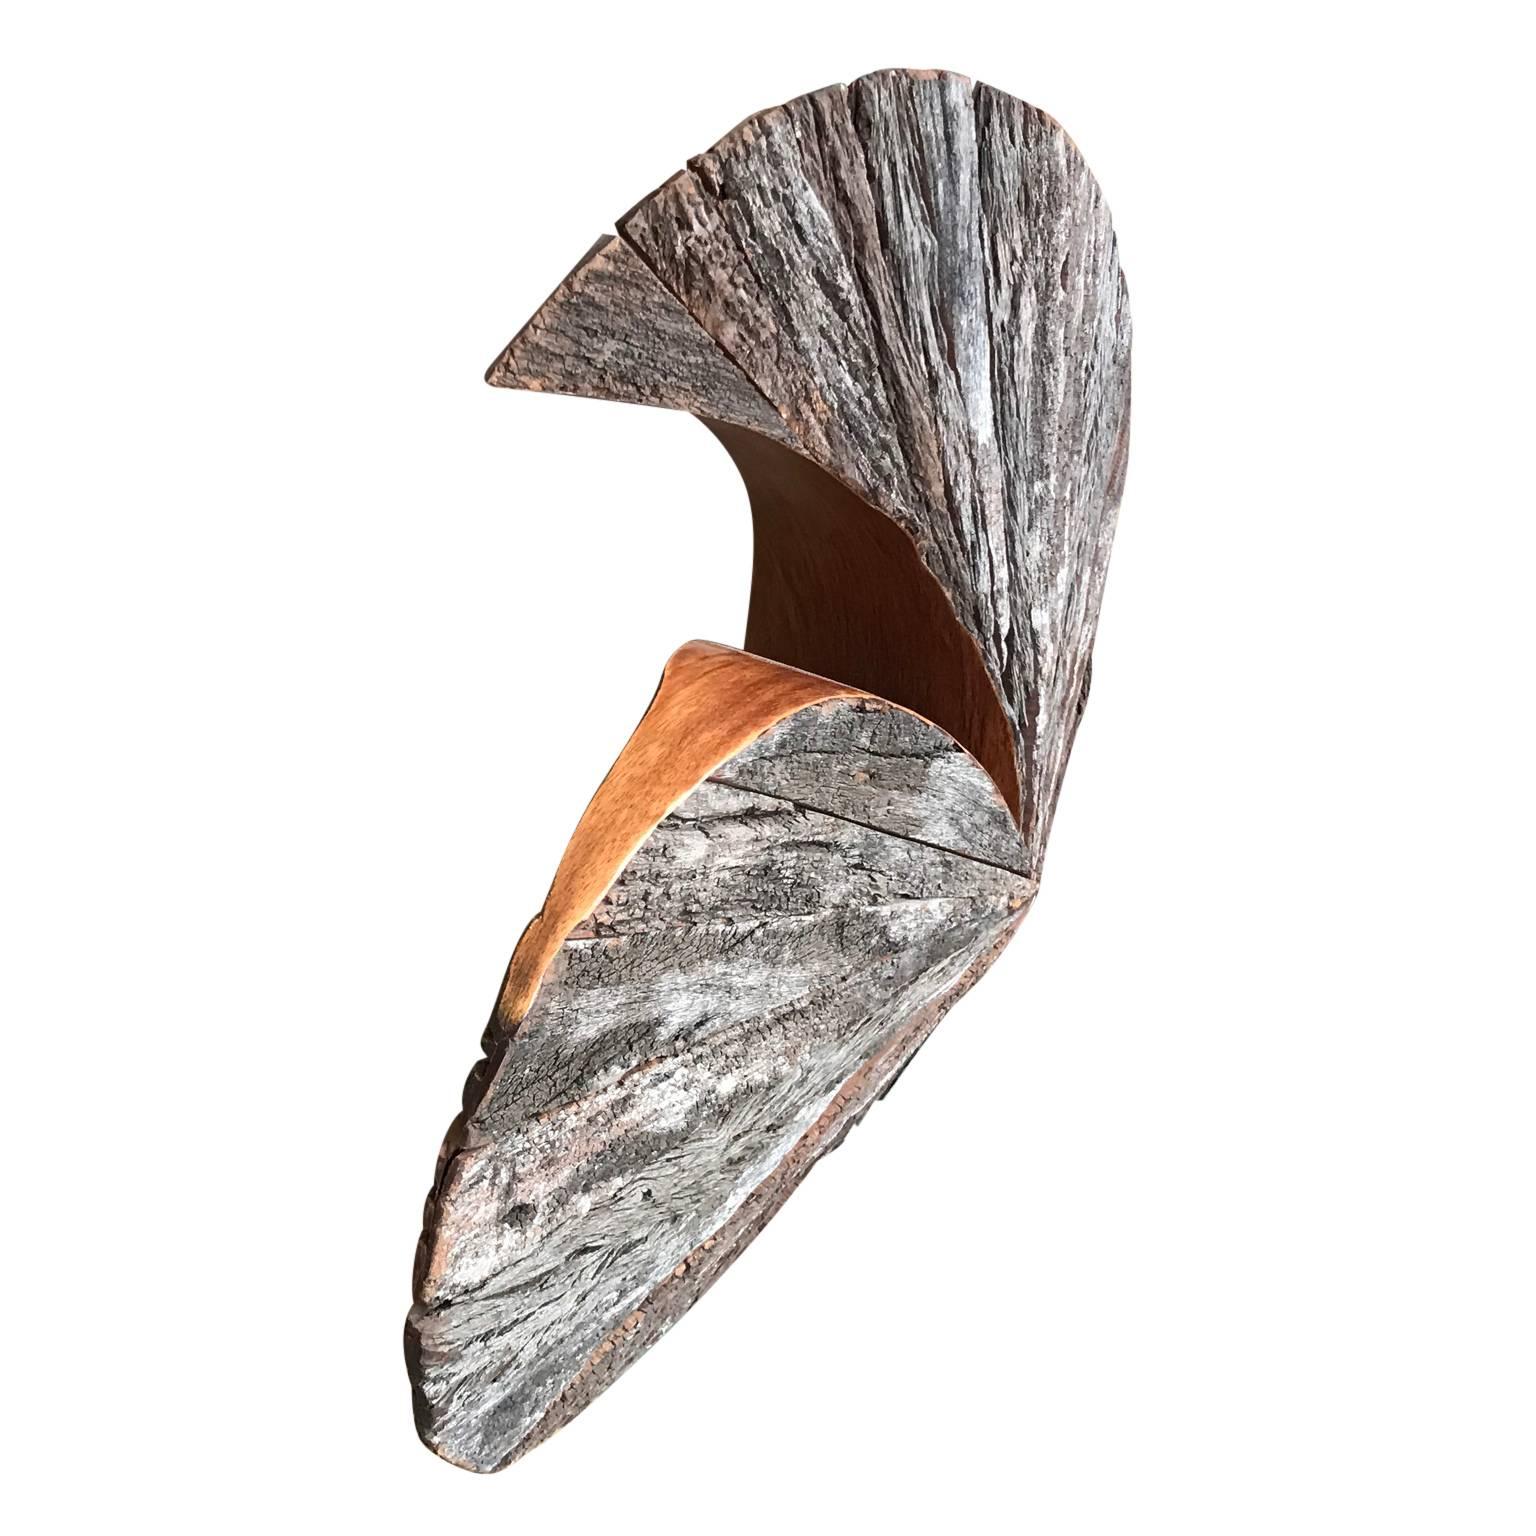 Organic Swirl Shaped Wooden Sculpture - Brown Abstract Sculpture by Ricardo Pascale